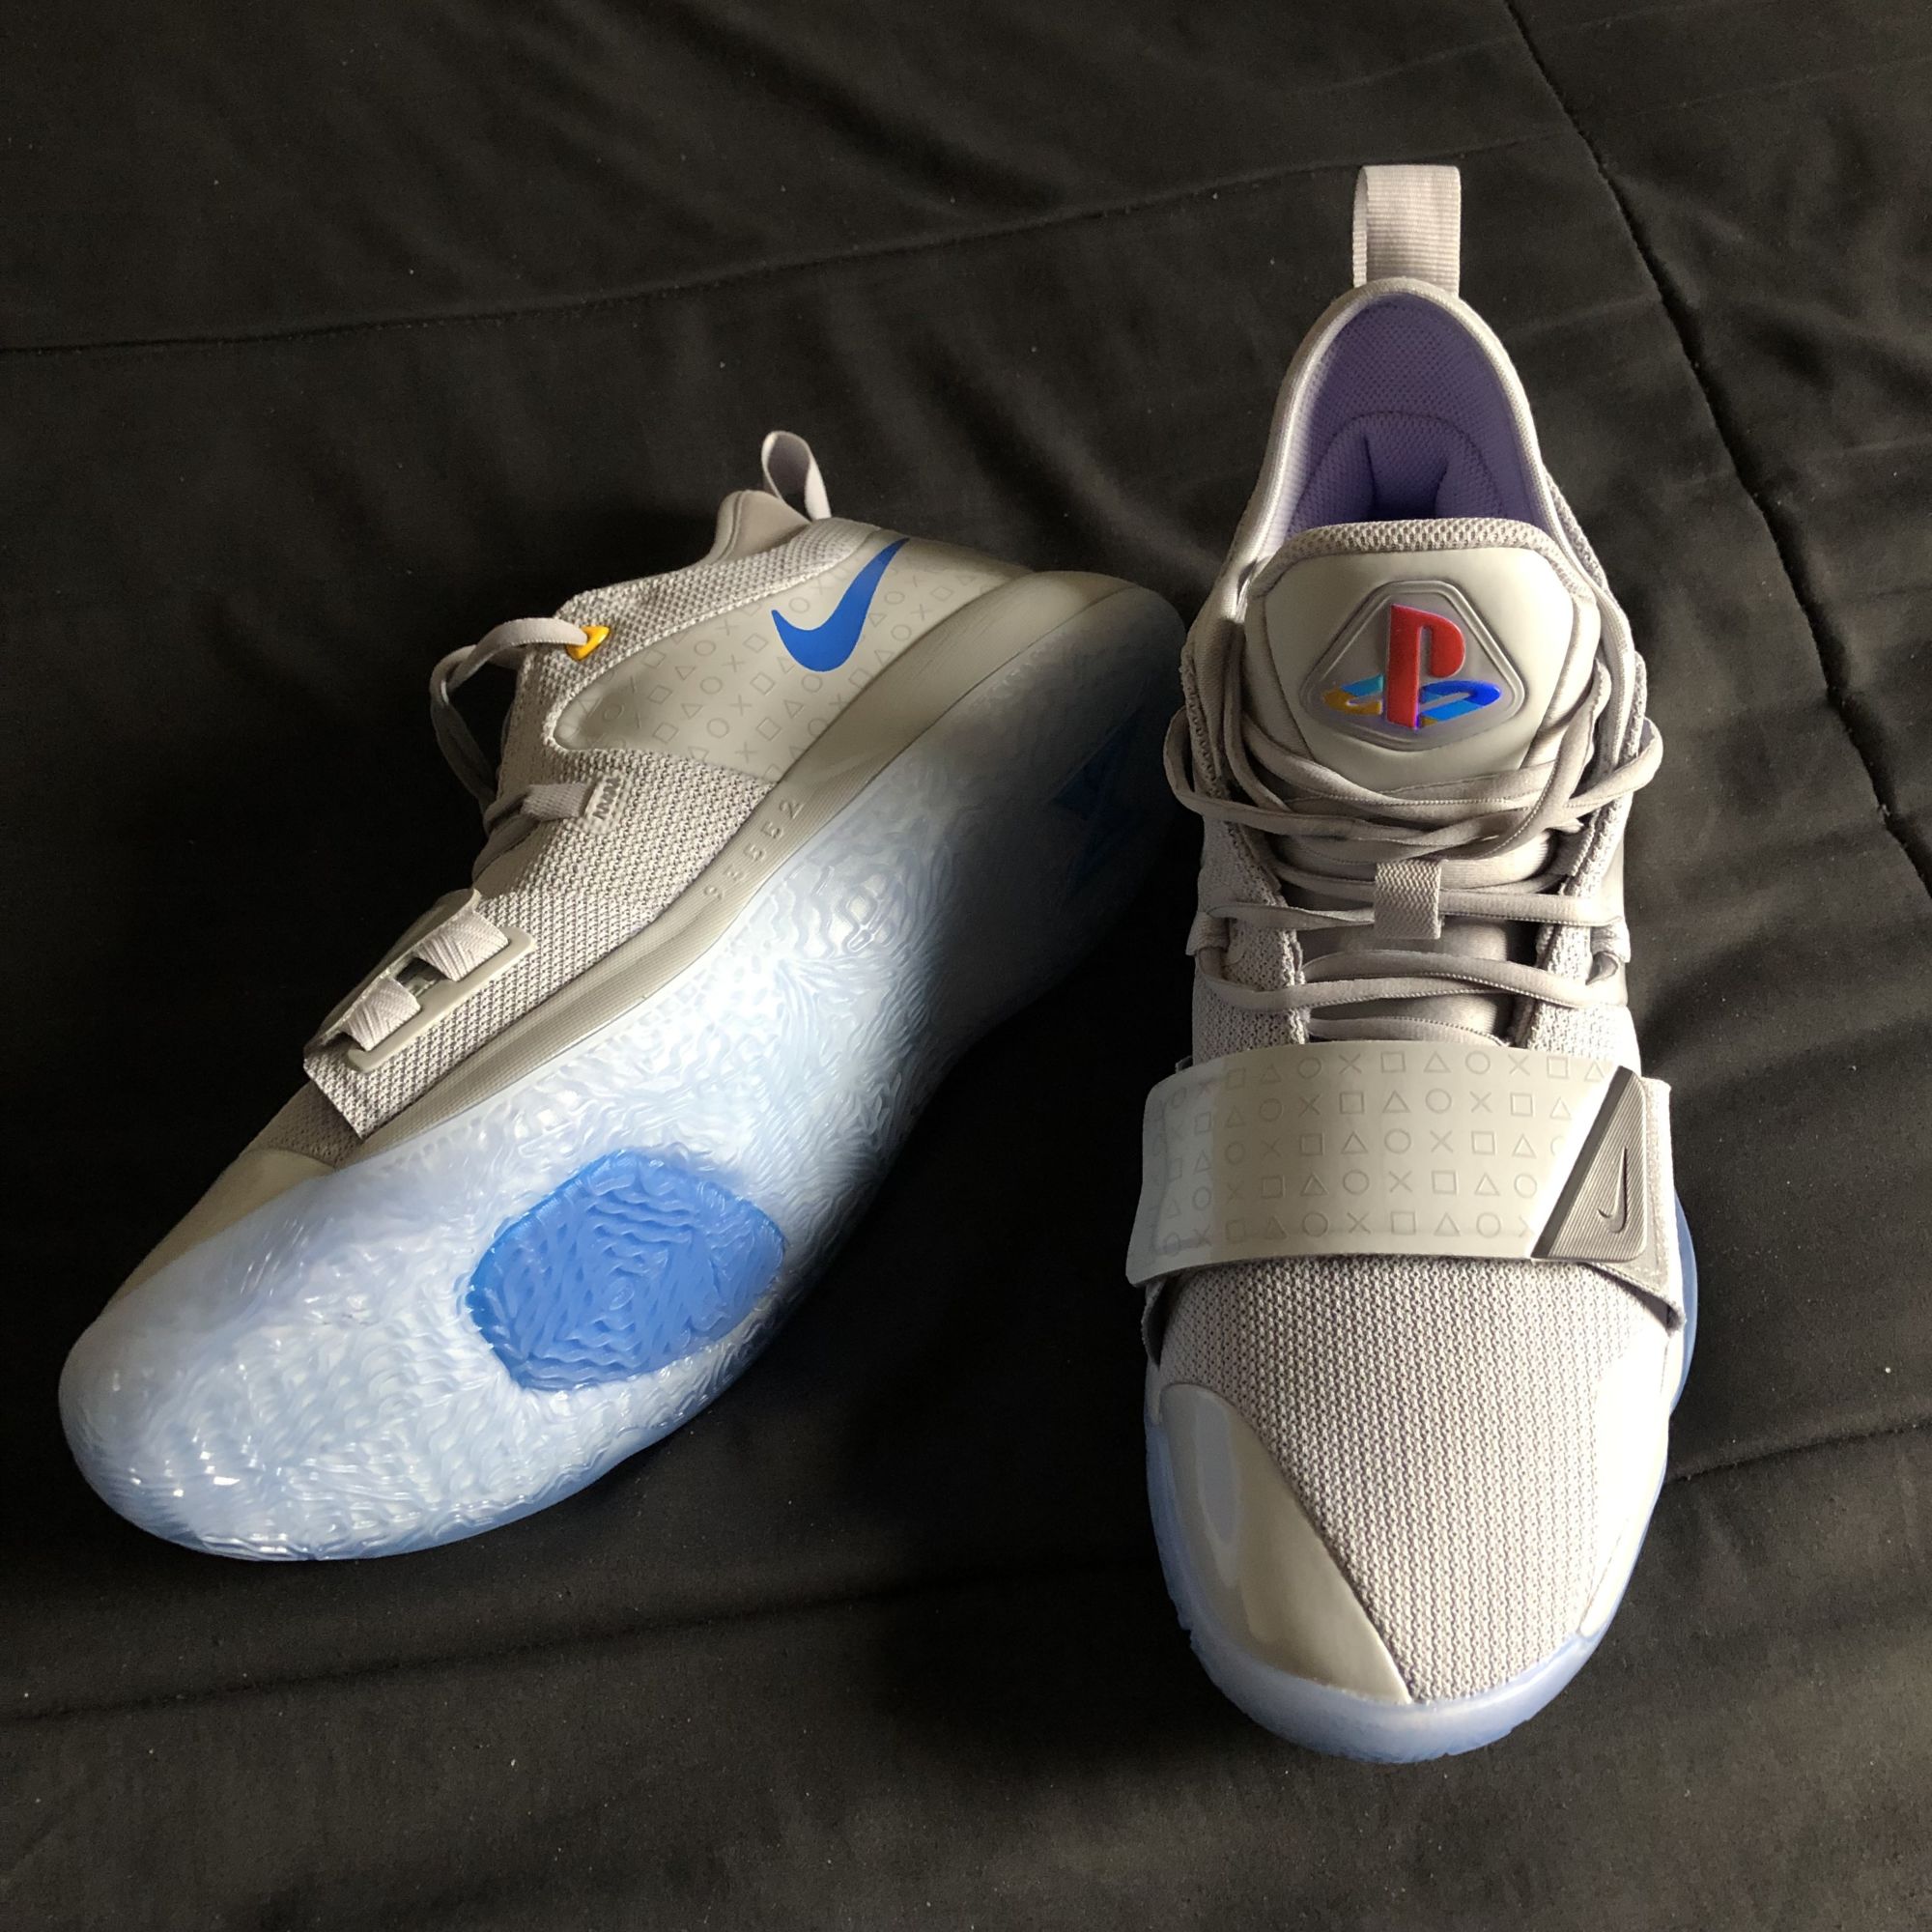 pg 2.5 shoes review